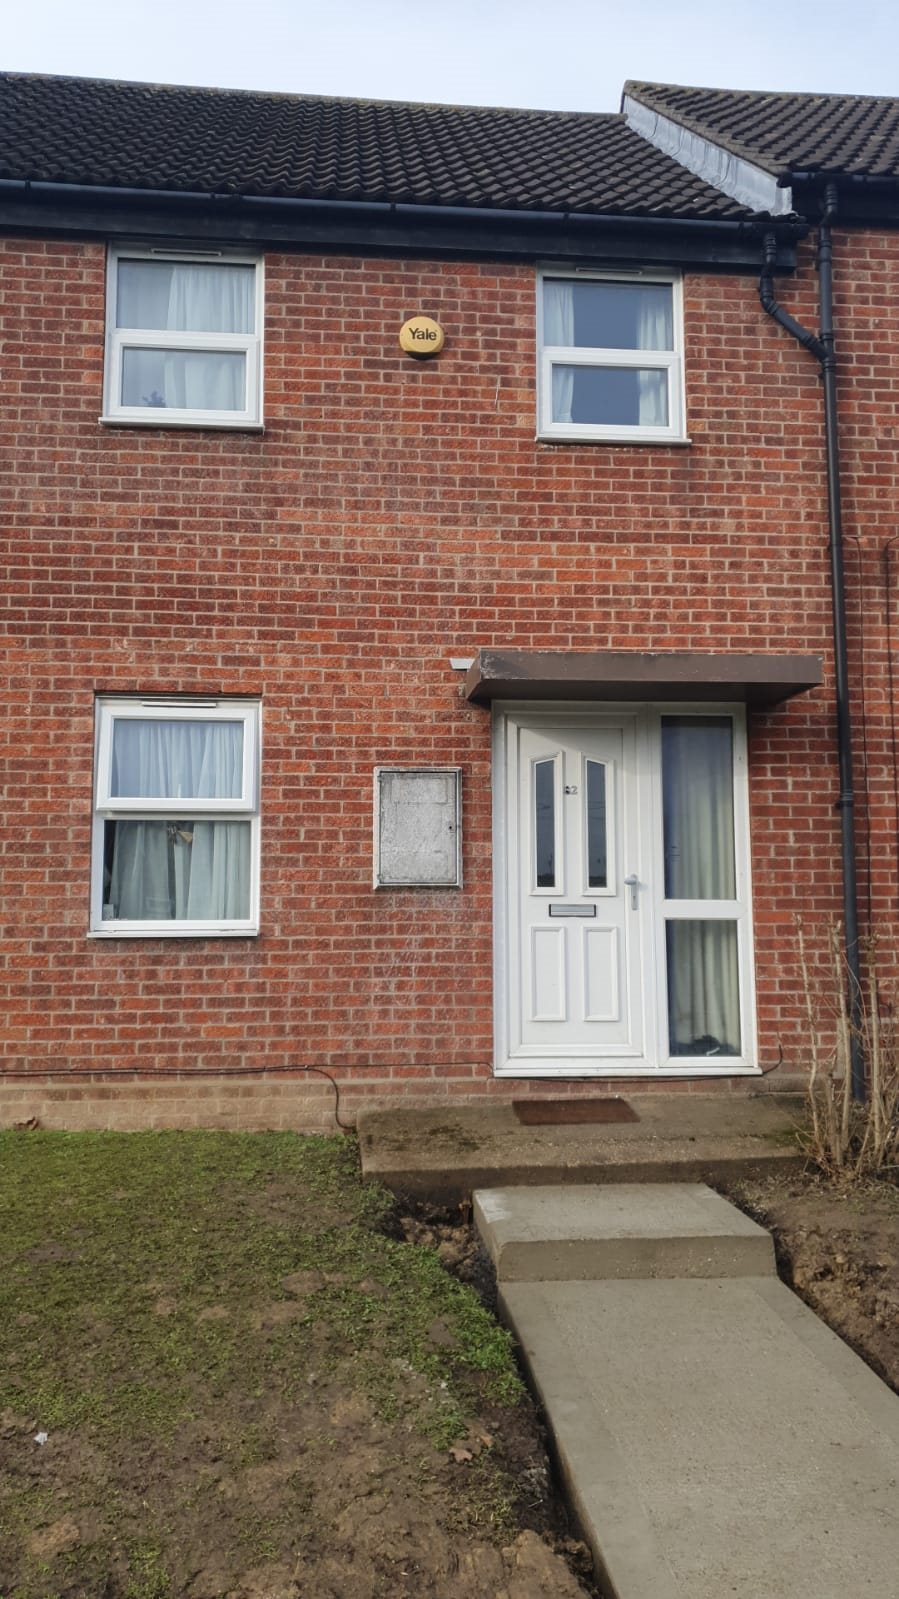 4 bed house to rent in Avon Way, Colchester, CO4 